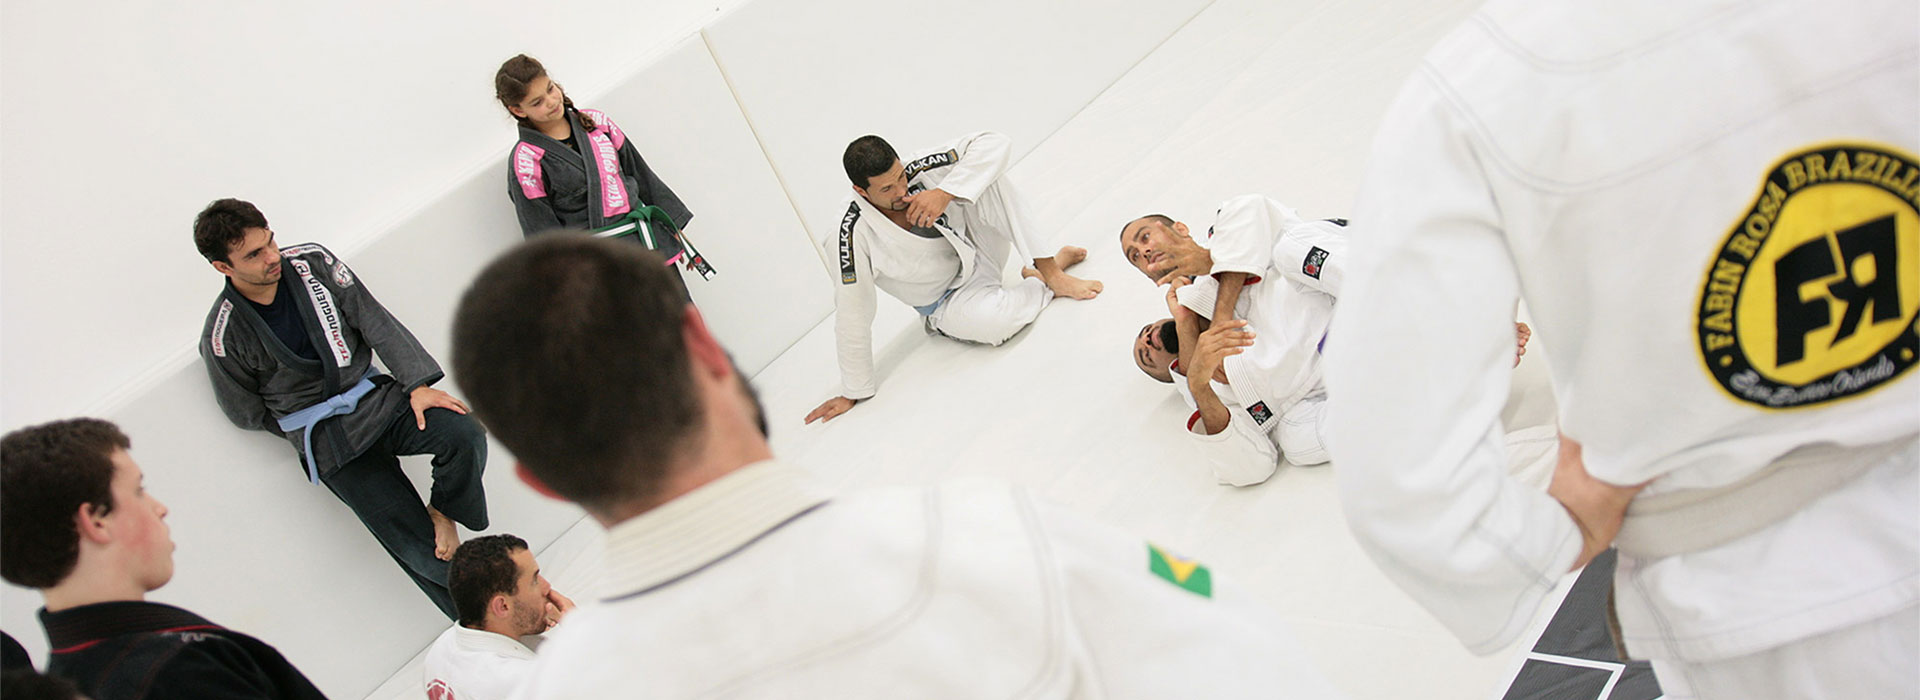 Martial Arts Classes Near South Orange for Kids and Adults